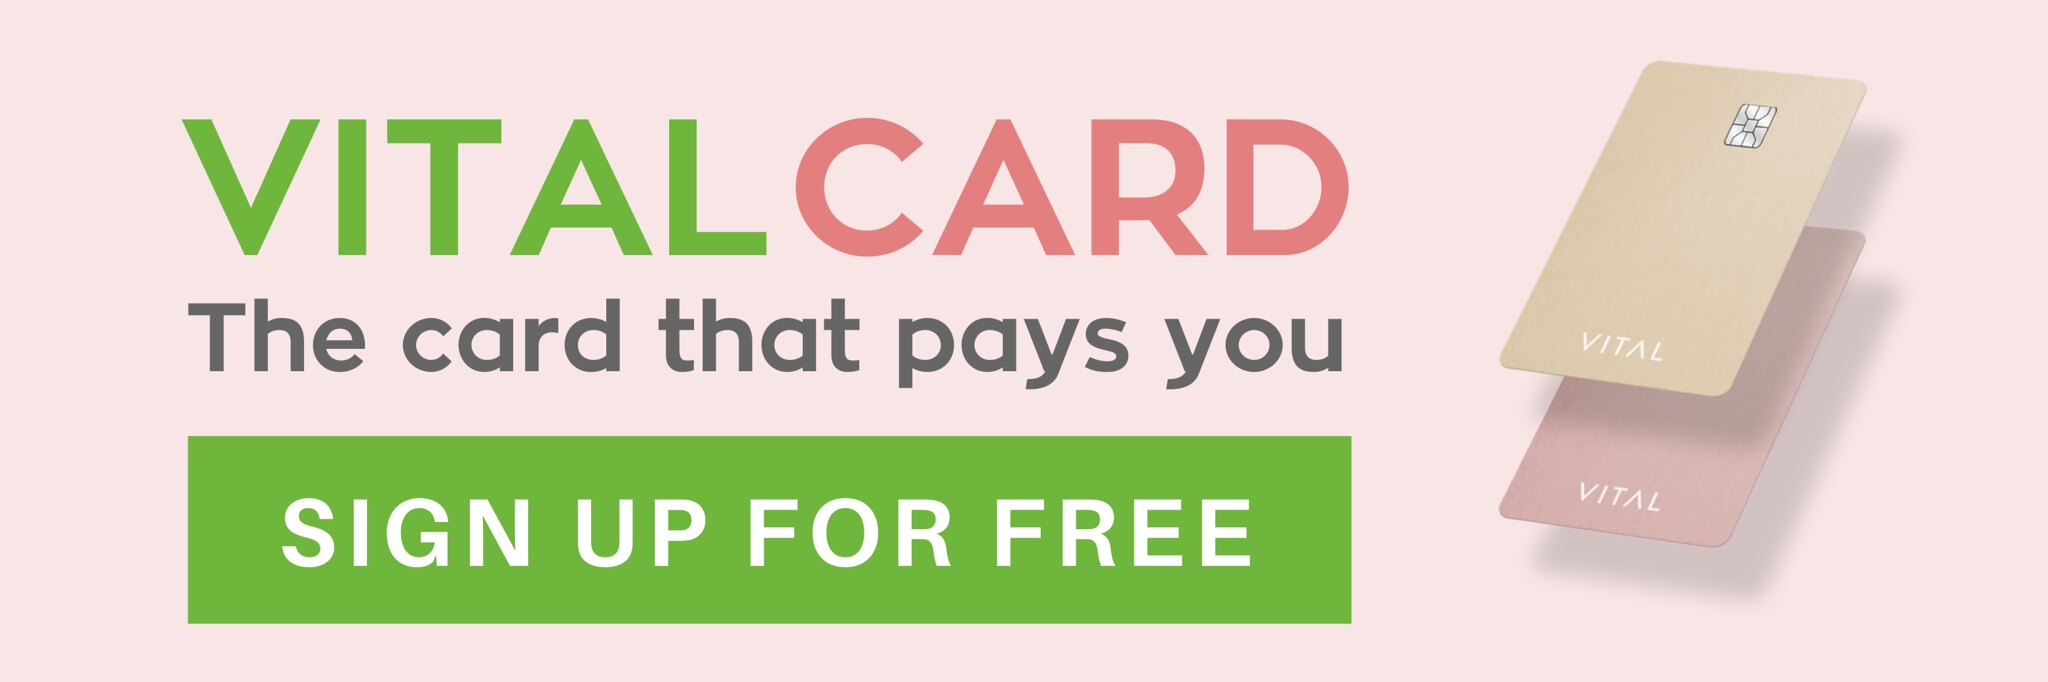 vital card - the card that pays you when you refer